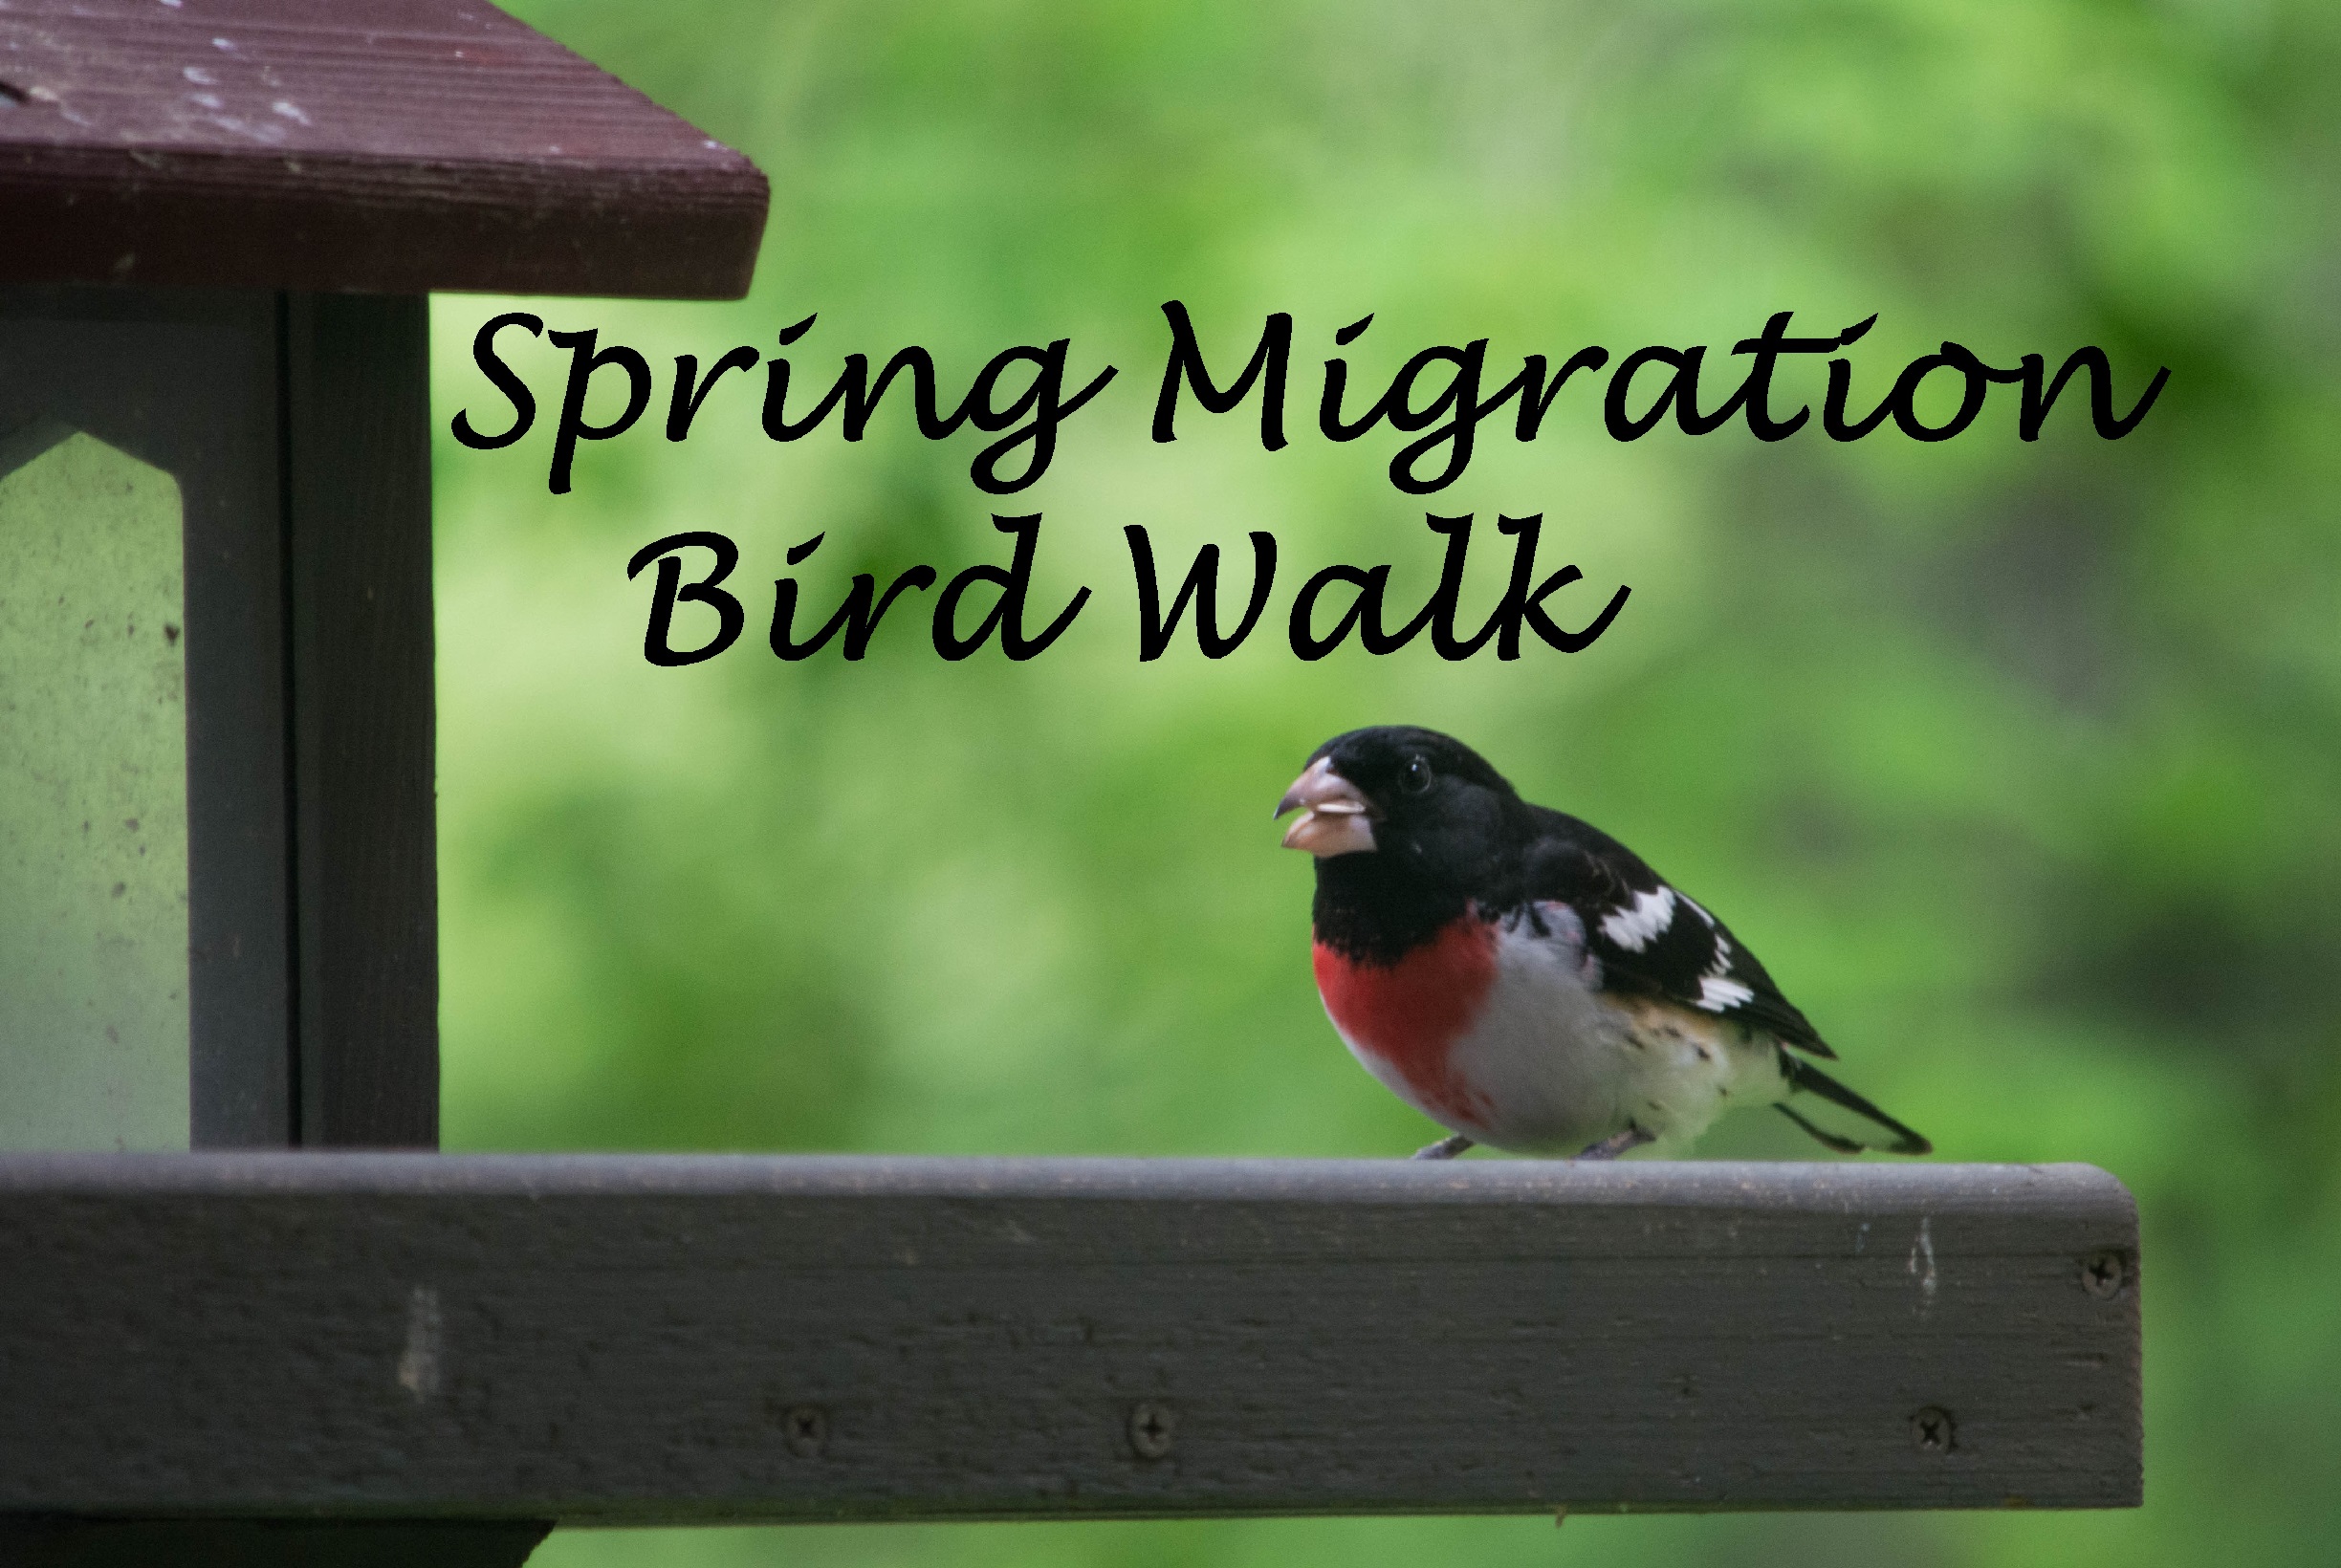 a bird on a board with the text, "Spring Migration Bird Walk".